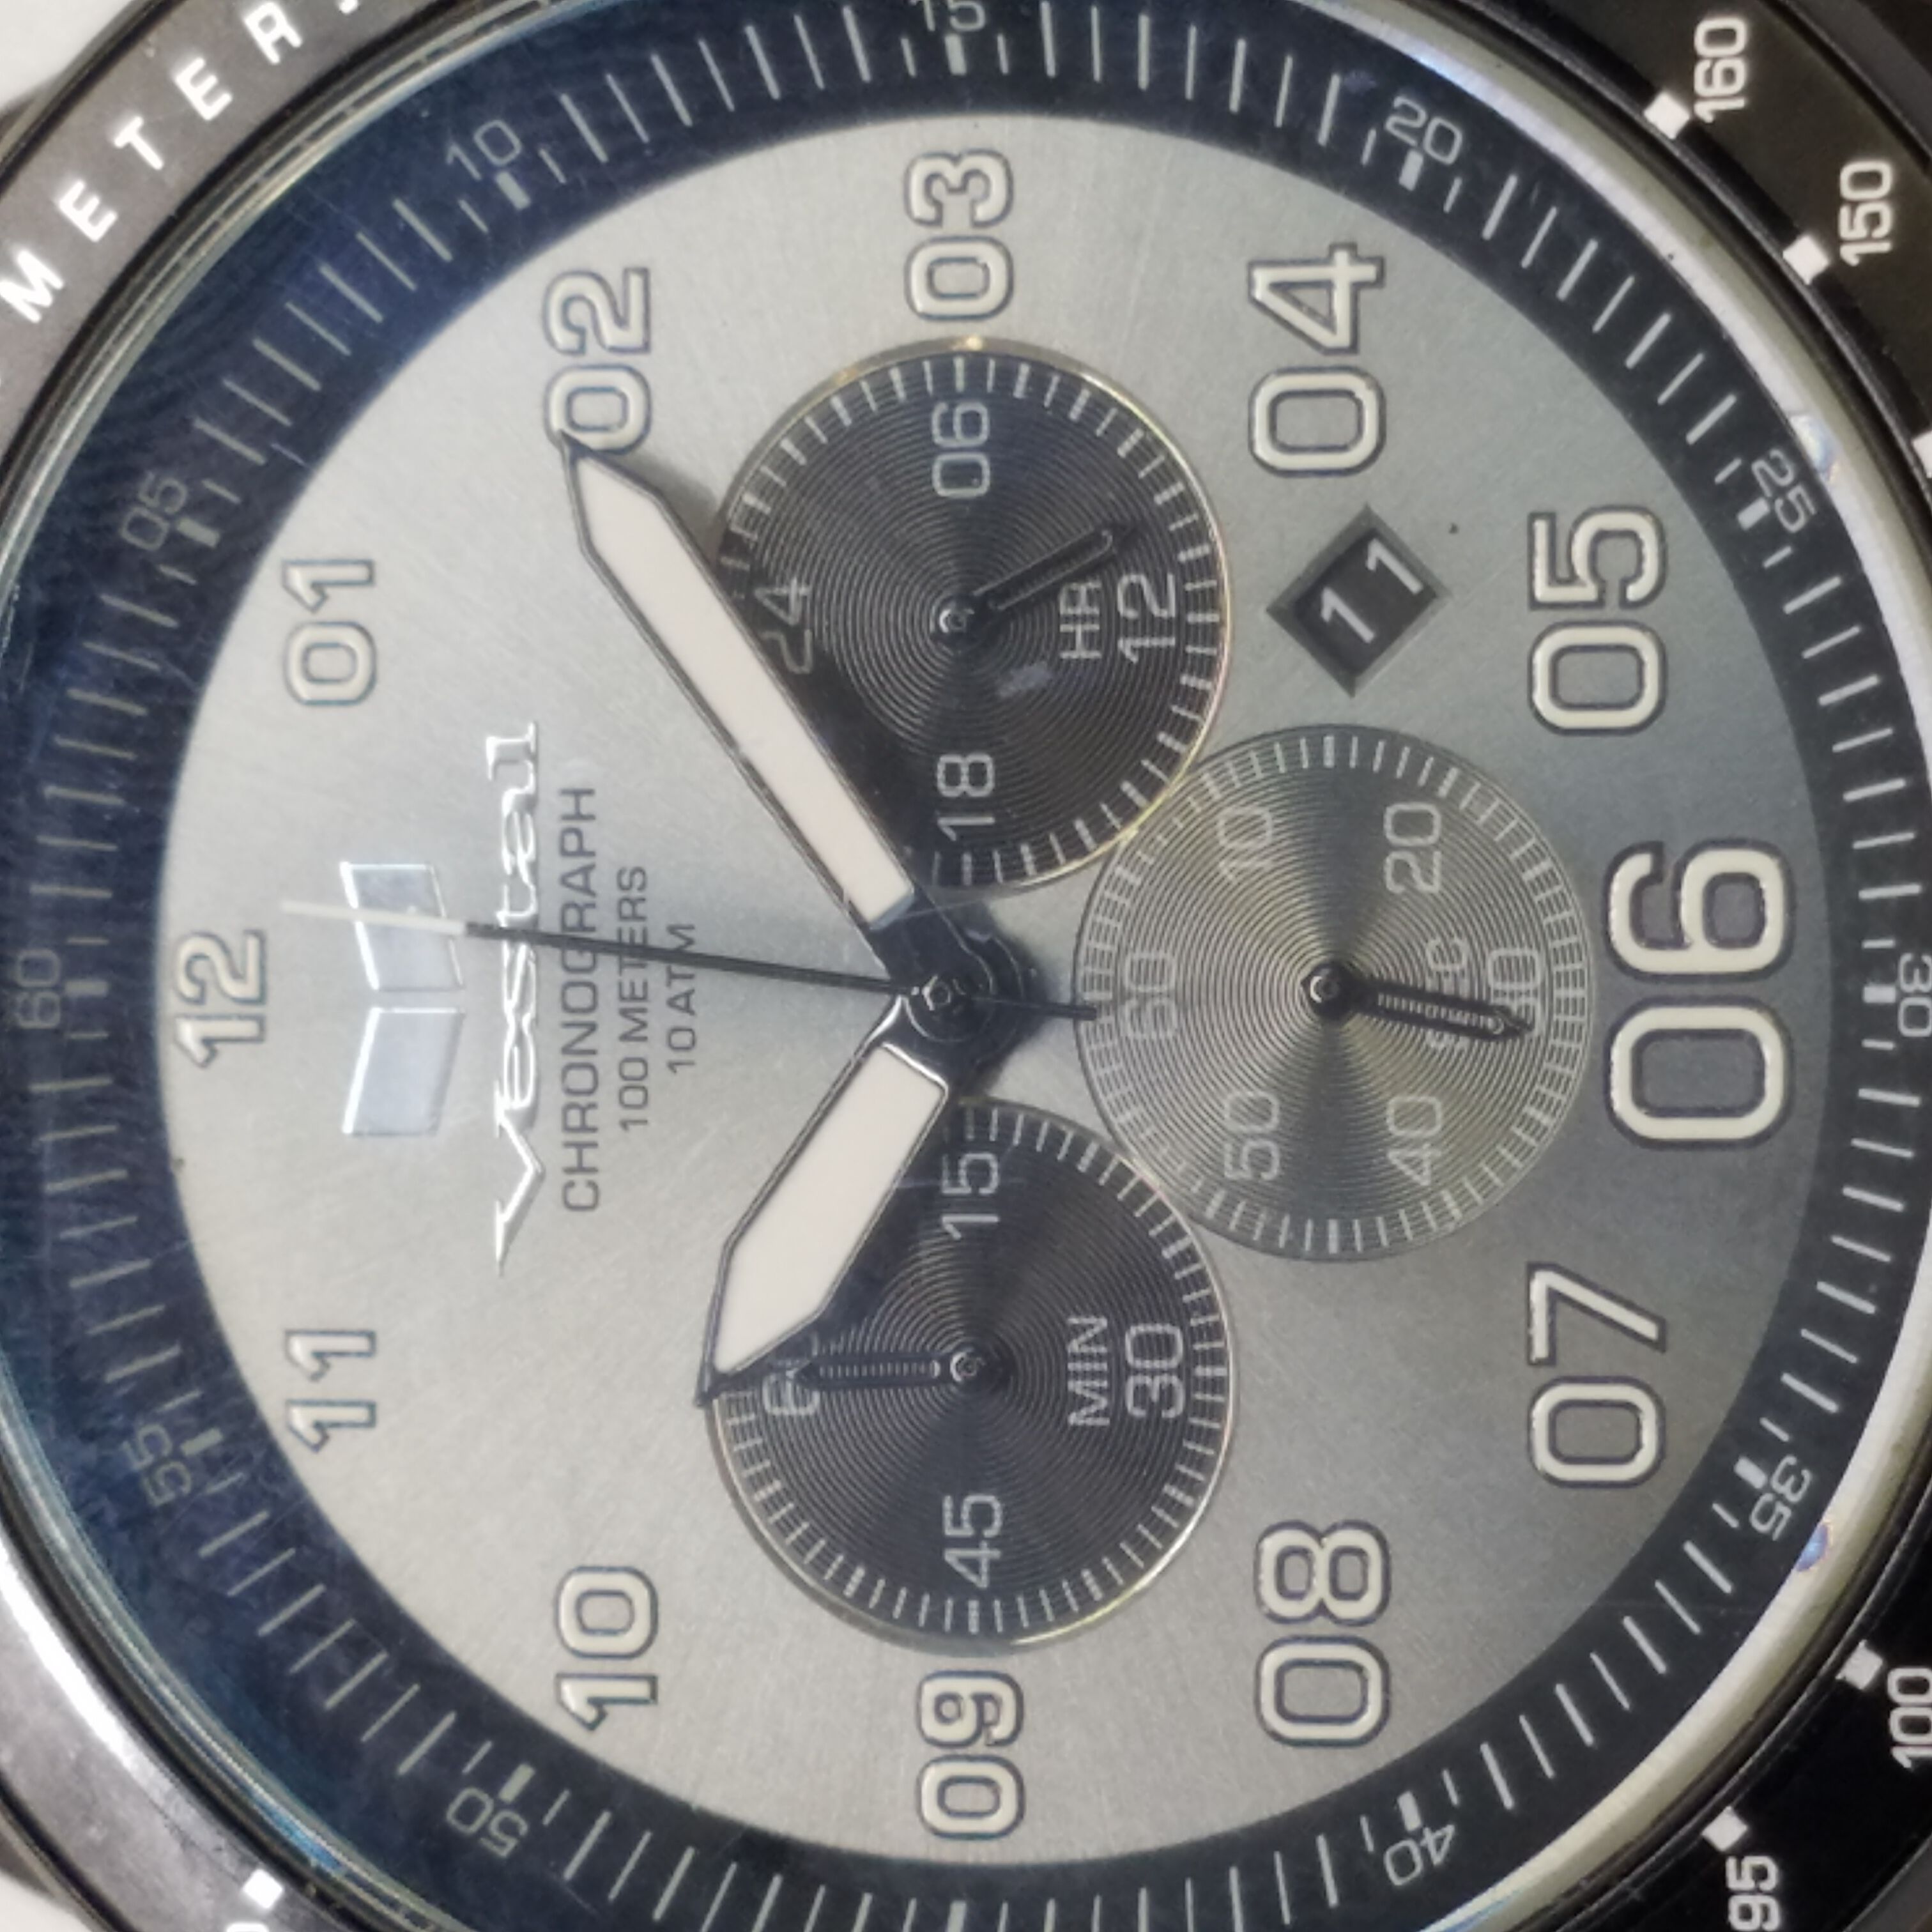 Vestal ZR3 Stainless Steel Chronograph 100M WR Watch